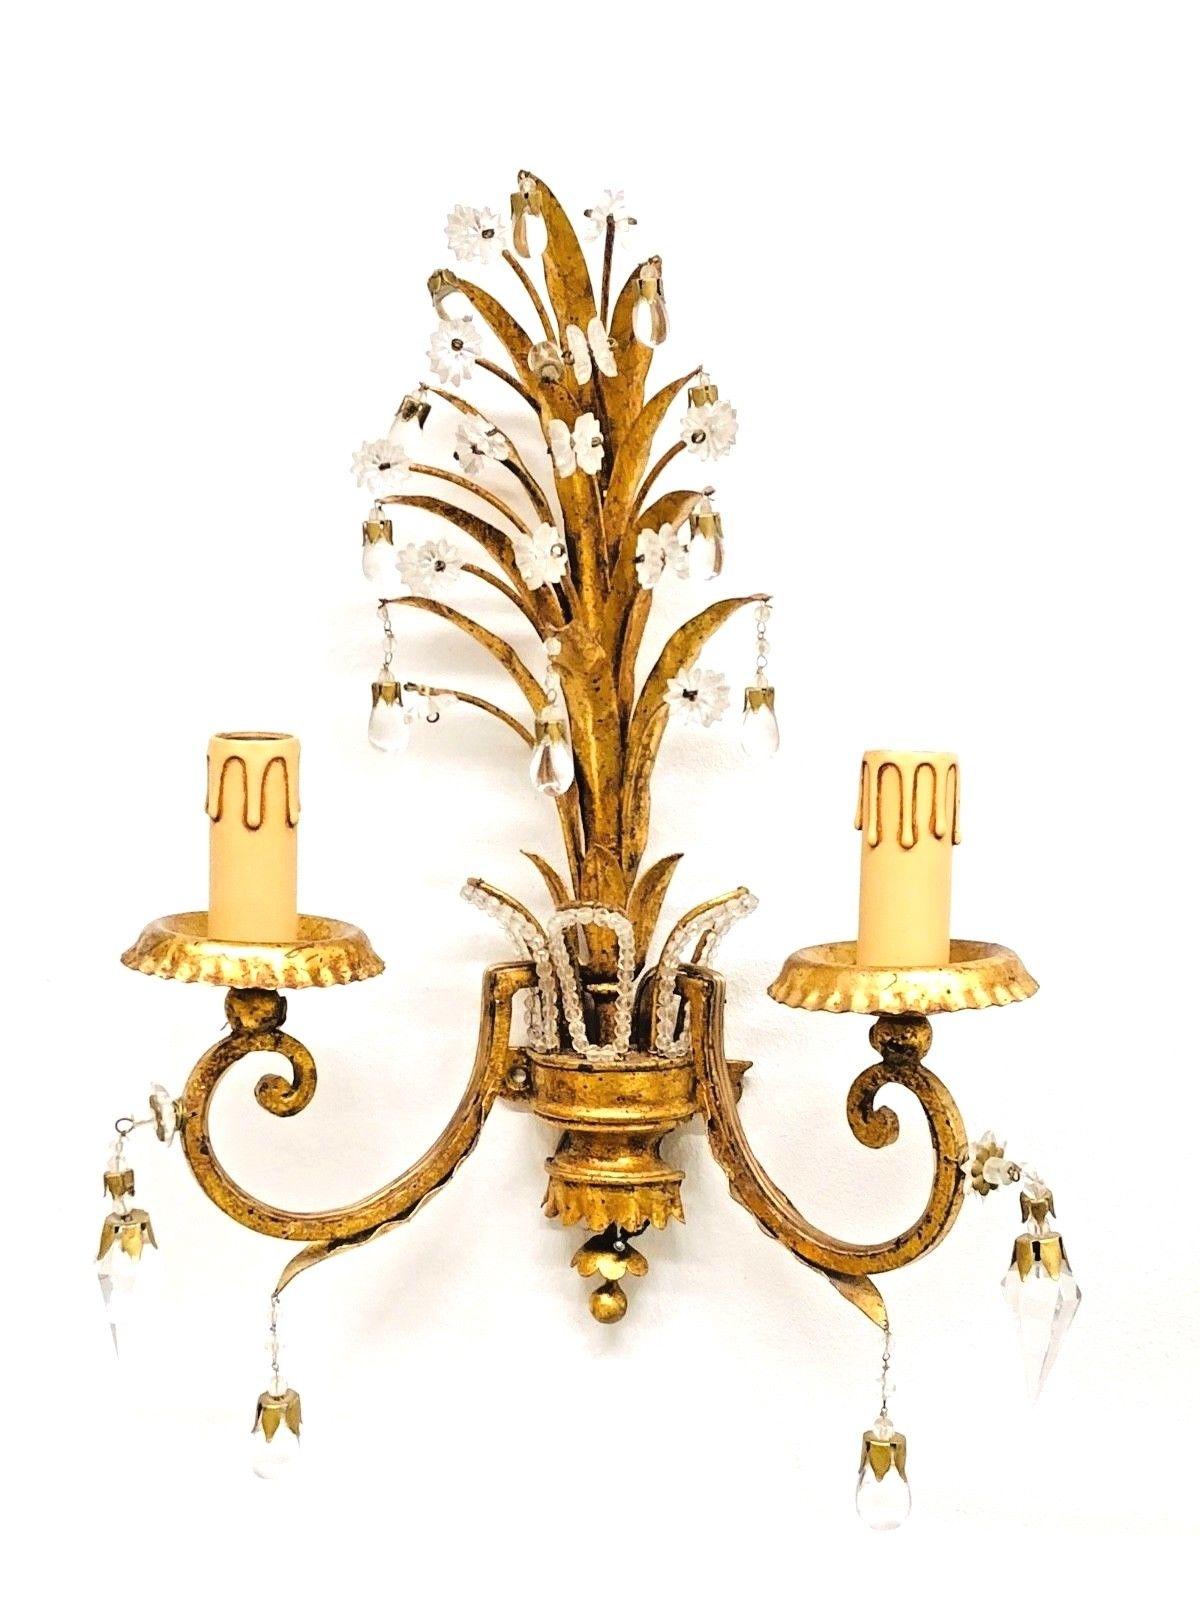 Italian Pair of Sconces with Pineapple Leaves in the Style of Maison Baguès